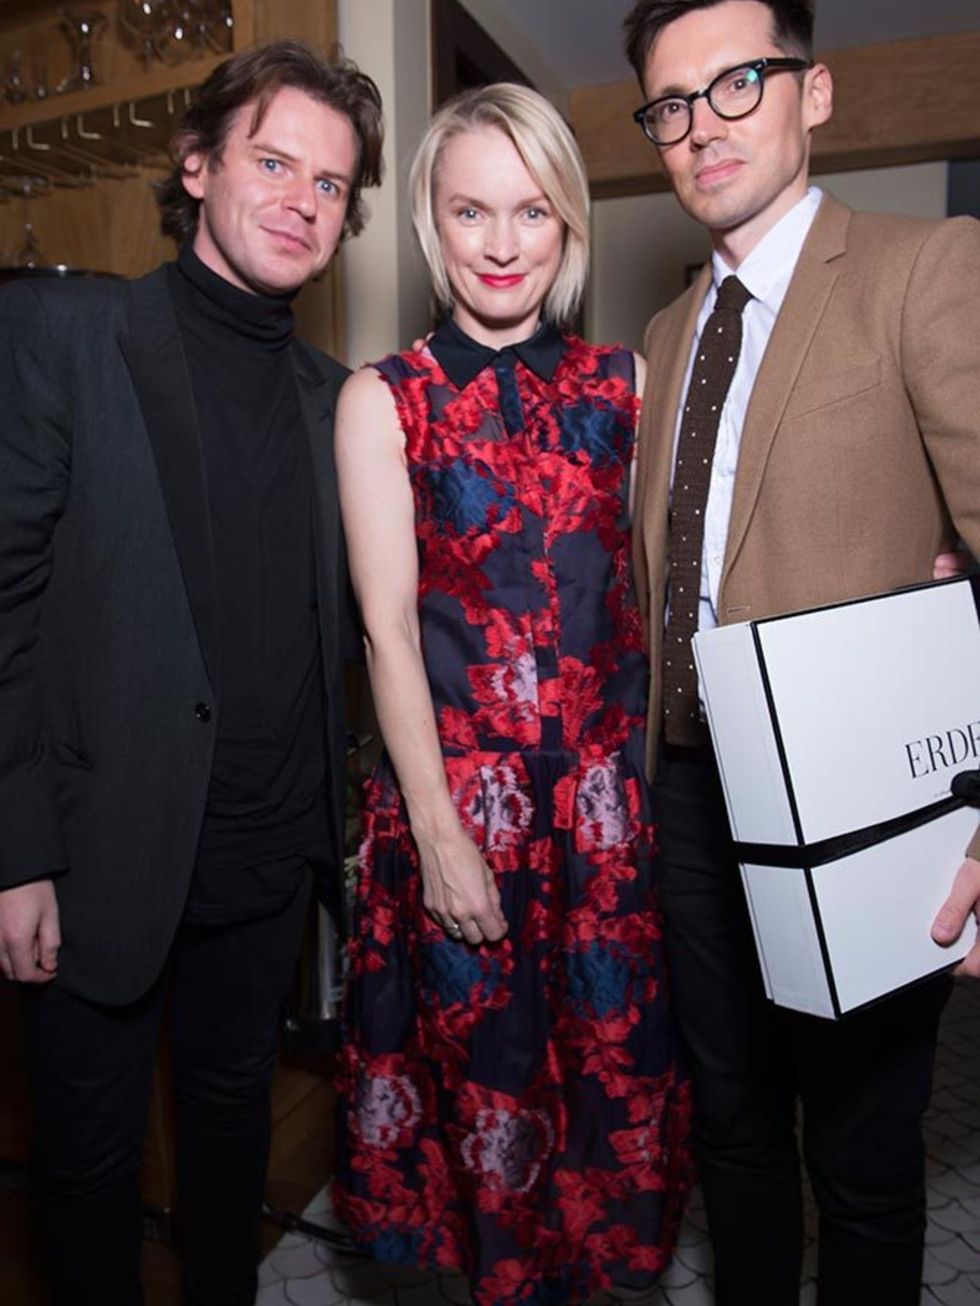 Christopher Kane, Lorraine Candy and Erdem at Alexa Chung's birthday party at South Kensington Club in London, November 2015.